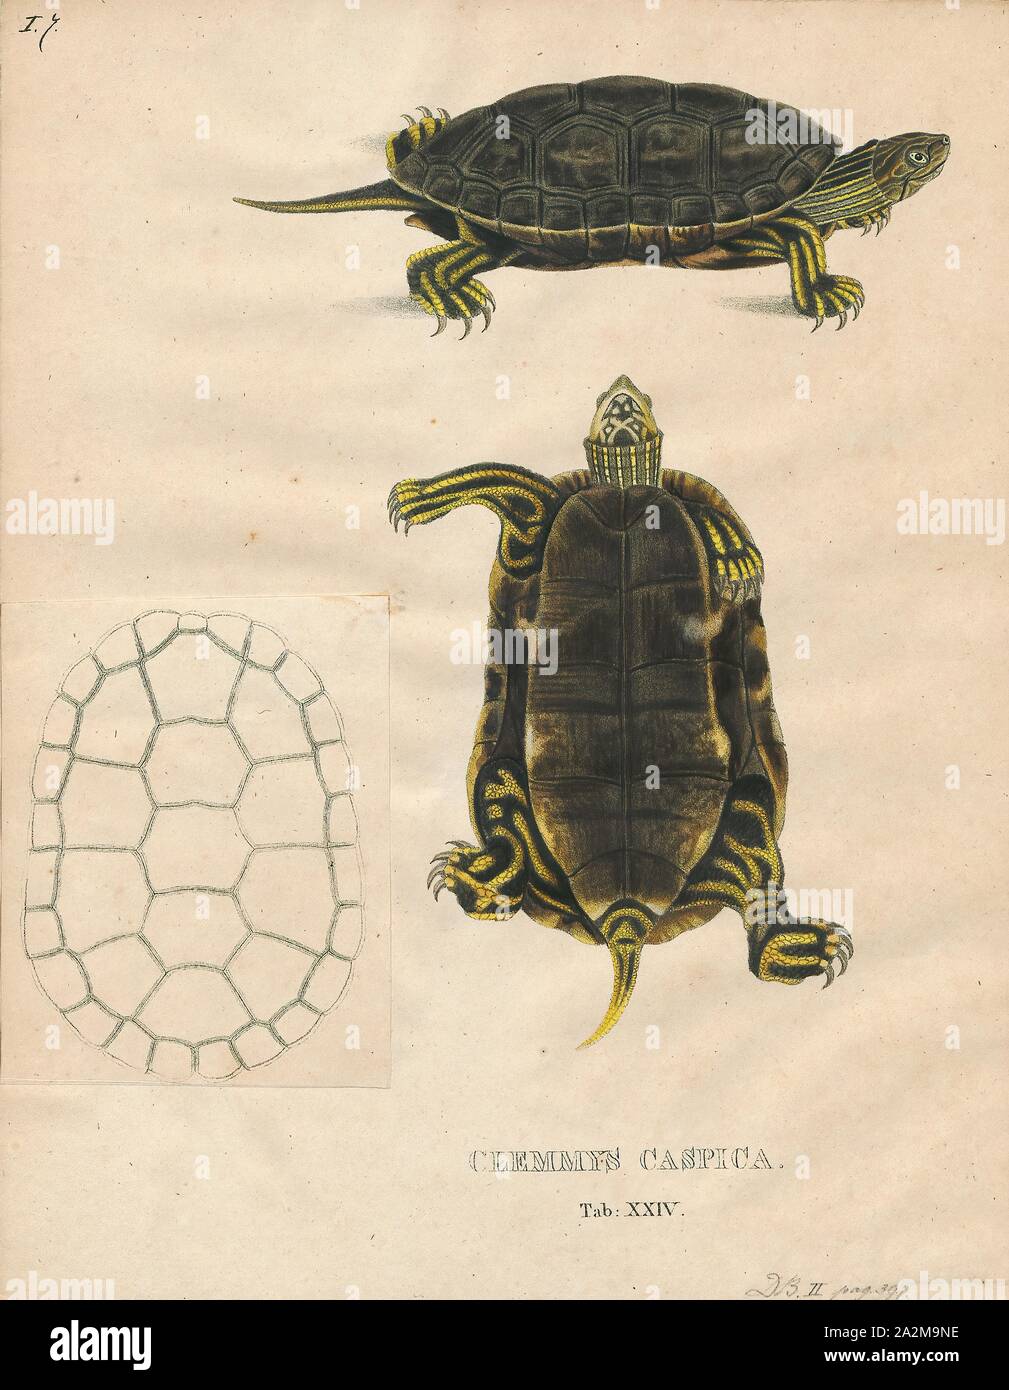 Clemmys caspica, Print, Spotted turtle, The spotted turtle (Clemmys guttata), the only species of the genus Clemmys, is a small, semi-aquatic turtle that reaches a carapace length of 8–12 cm (3.1–4.7 in) upon adulthood. Their broad, smooth, low dark-colored upper shell, or carapace, ranges in its exact colour from black to a bluish black with a number of tiny yellow round spots. The spotting patterning extends from the head, to the neck and out onto the limbs. Males and females can be distinguished by differences in plastron shape and eye and chin colouration., 1700-1880 Stock Photo